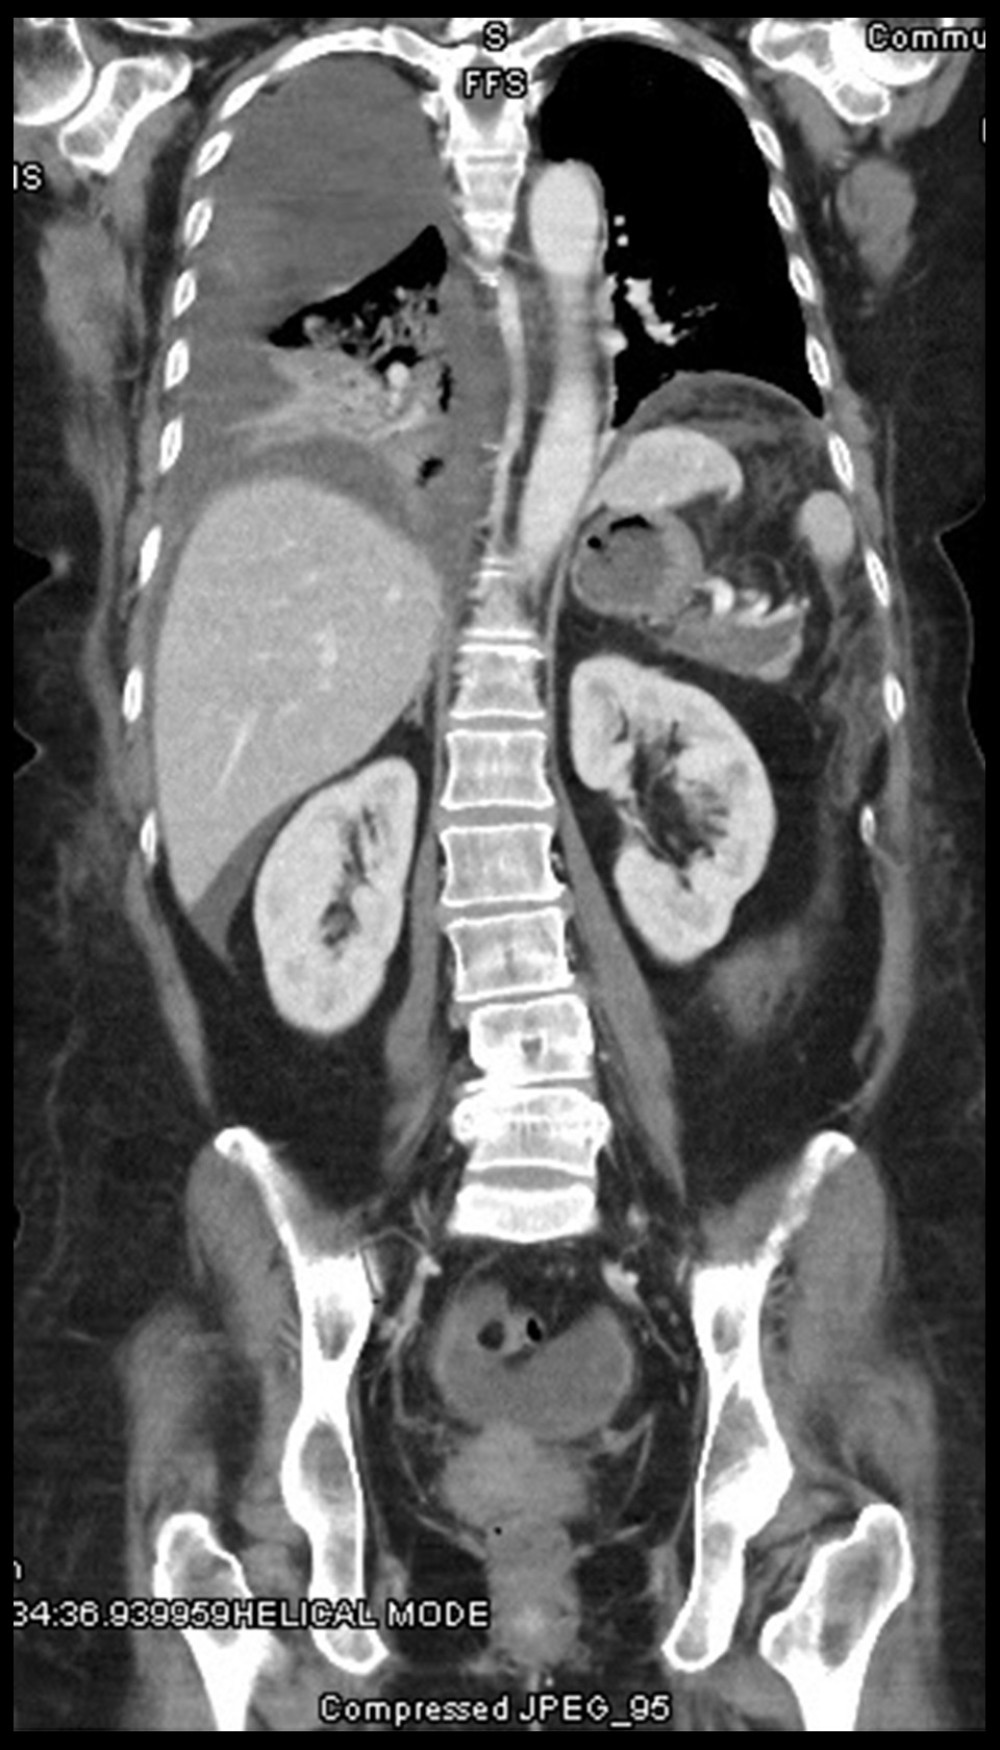 Coronal computed tomography scan of the chest and abdomen showed loculated moderate right pleural effusion and a small left pleural effusion with an associated right middle-lobe and right lower-lobe atelectasis and consolidation.